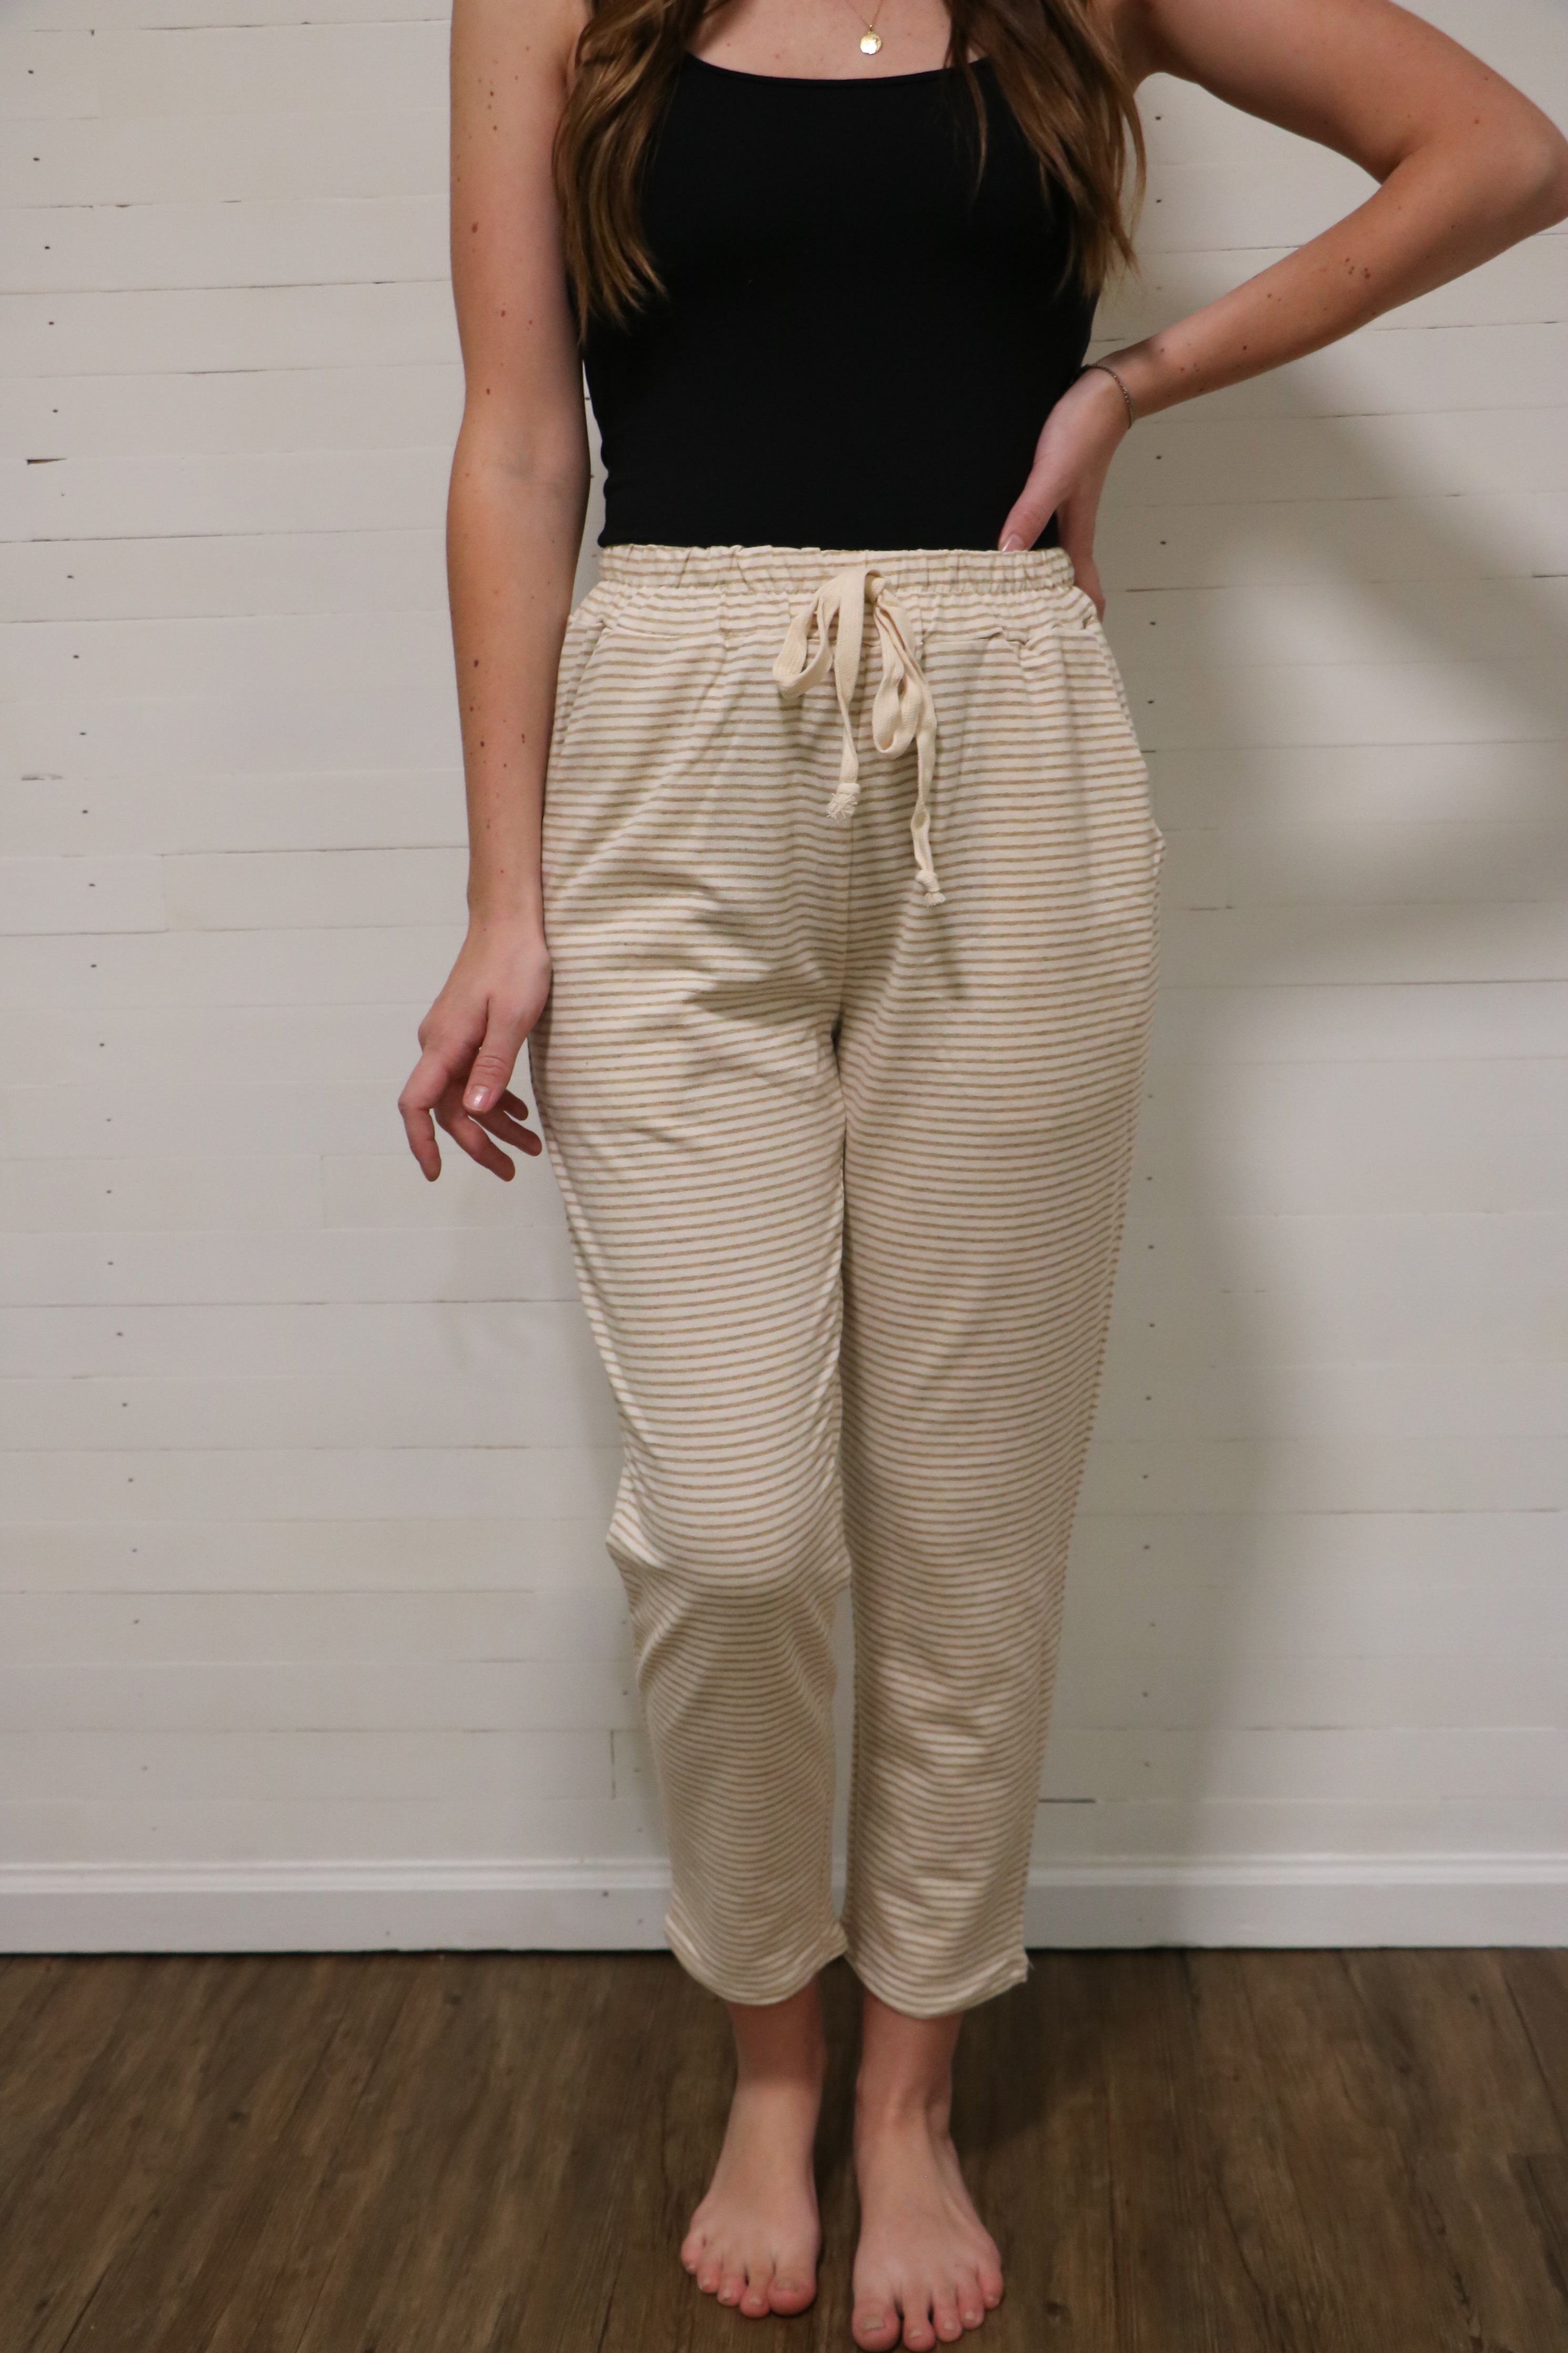 The Pinstripe Joggers (One Left - Size L)